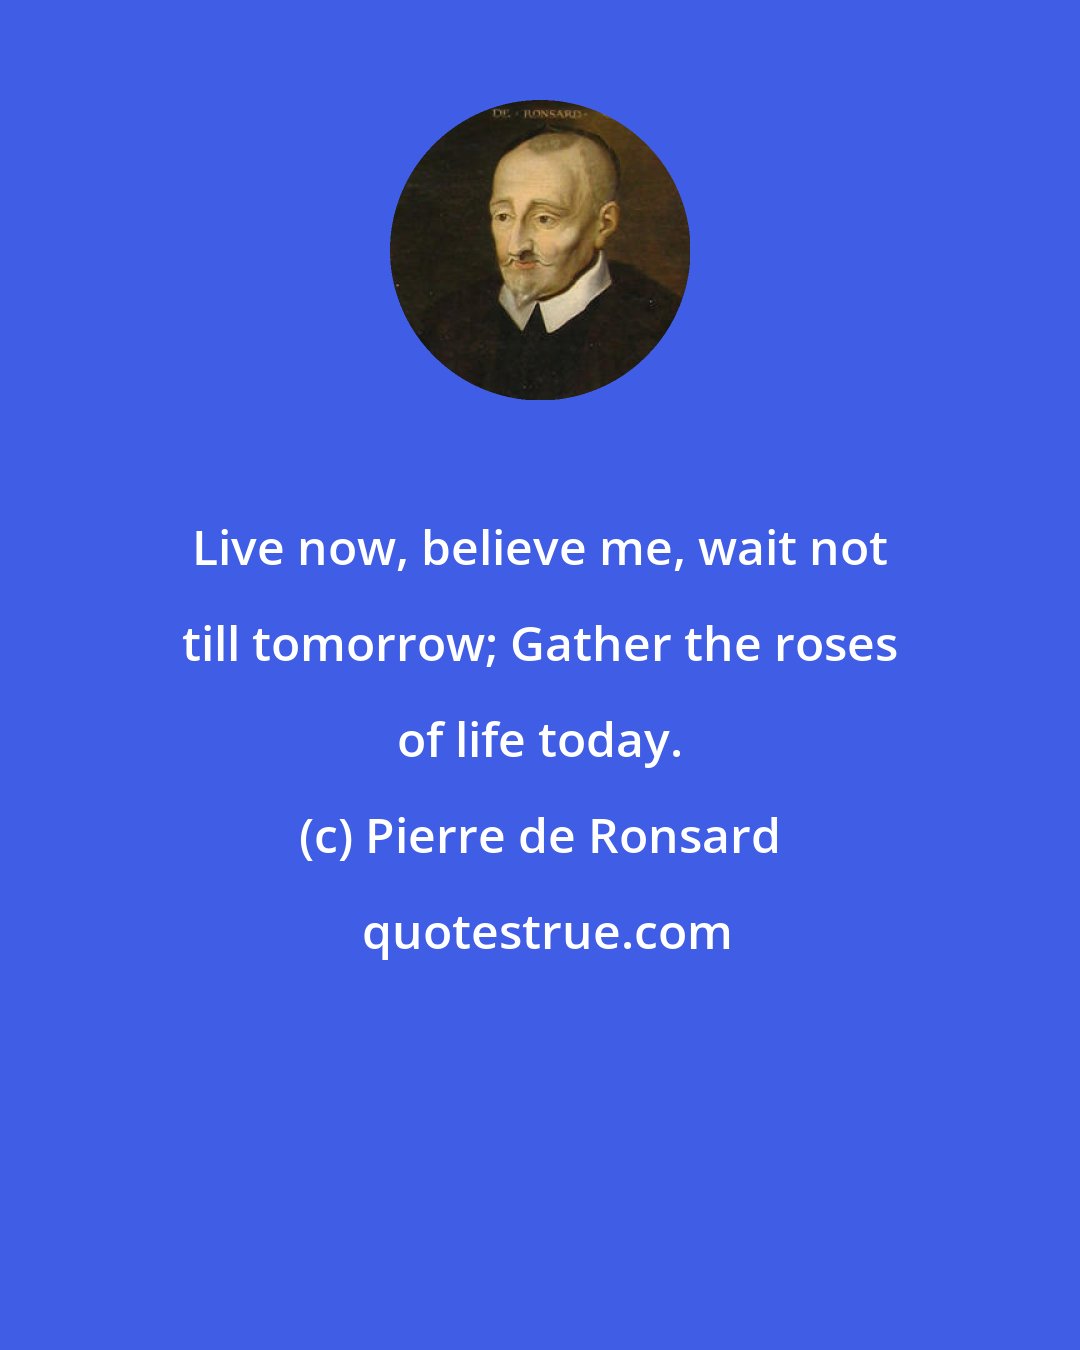 Pierre de Ronsard: Live now, believe me, wait not till tomorrow; Gather the roses of life today.